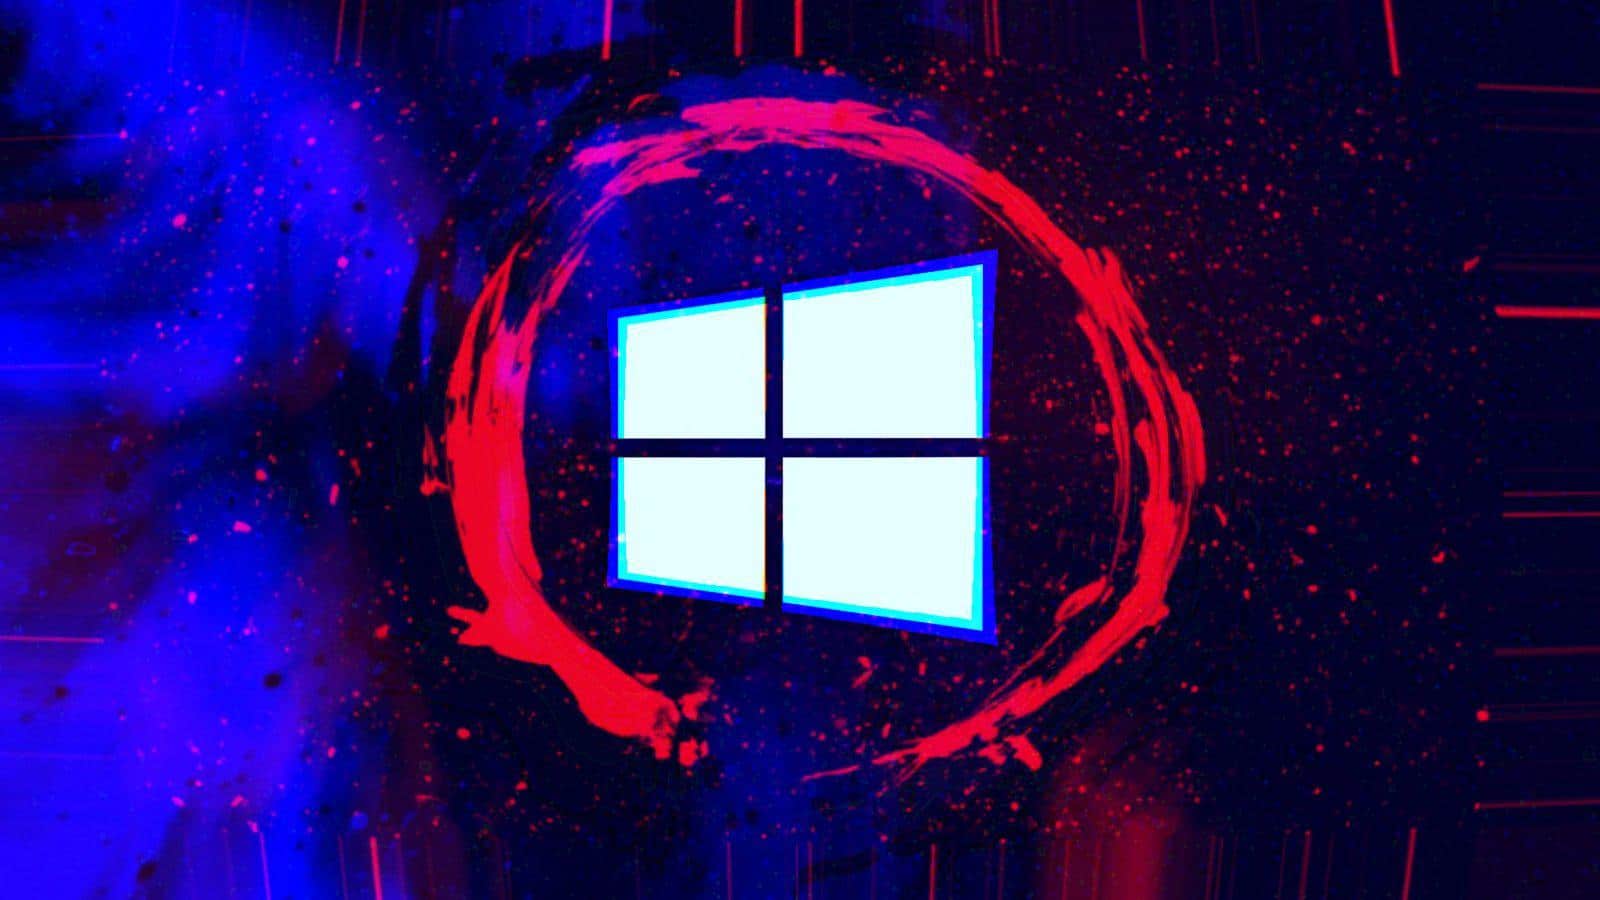 Microsoft releases Windows security updates for Intel CPU flaws